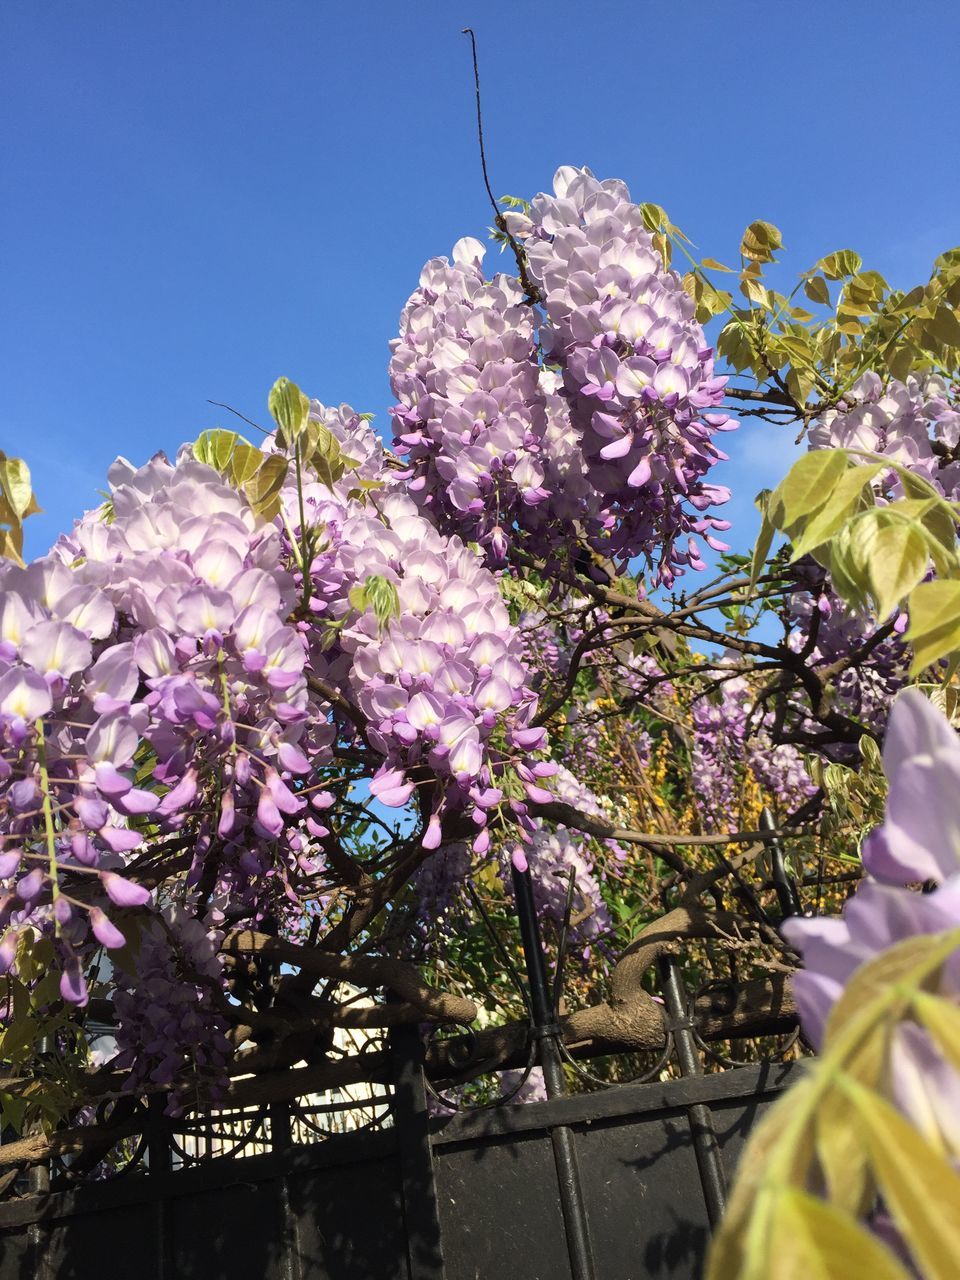 flower, freshness, growth, fragility, nature, beauty in nature, springtime, purple, wisteria, tree, low angle view, branch, blossom, no people, outdoors, day, sky, close-up